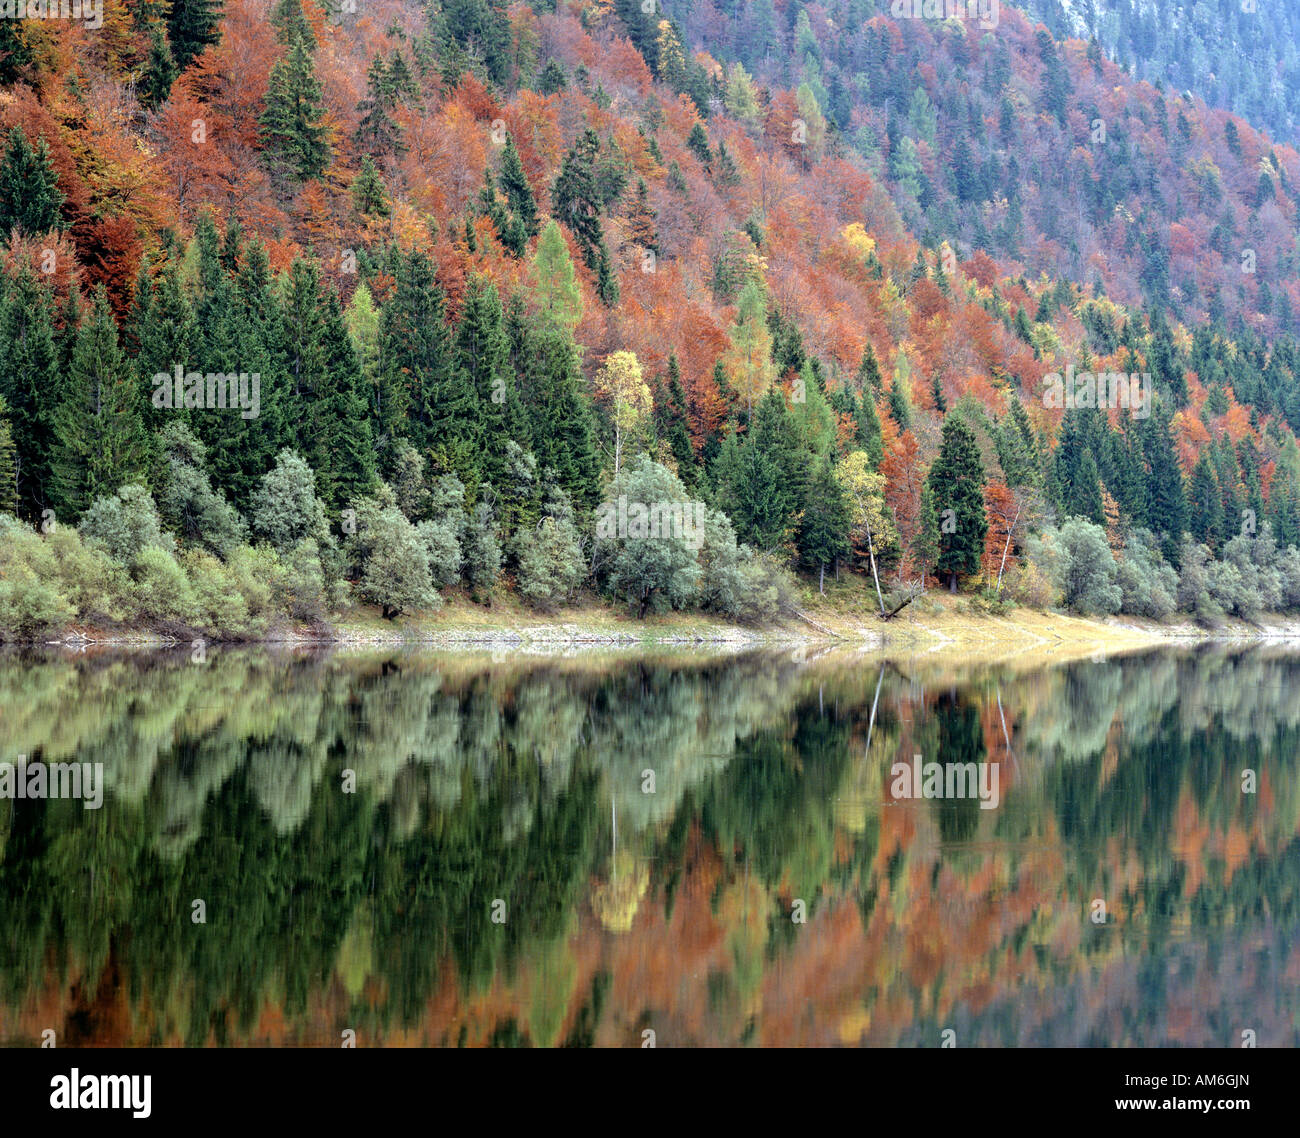 Mountain forest in autumn, Lake Mittersee near Ruhpolding, Chiemgau, Upper Bavaria, Germany Stock Photo